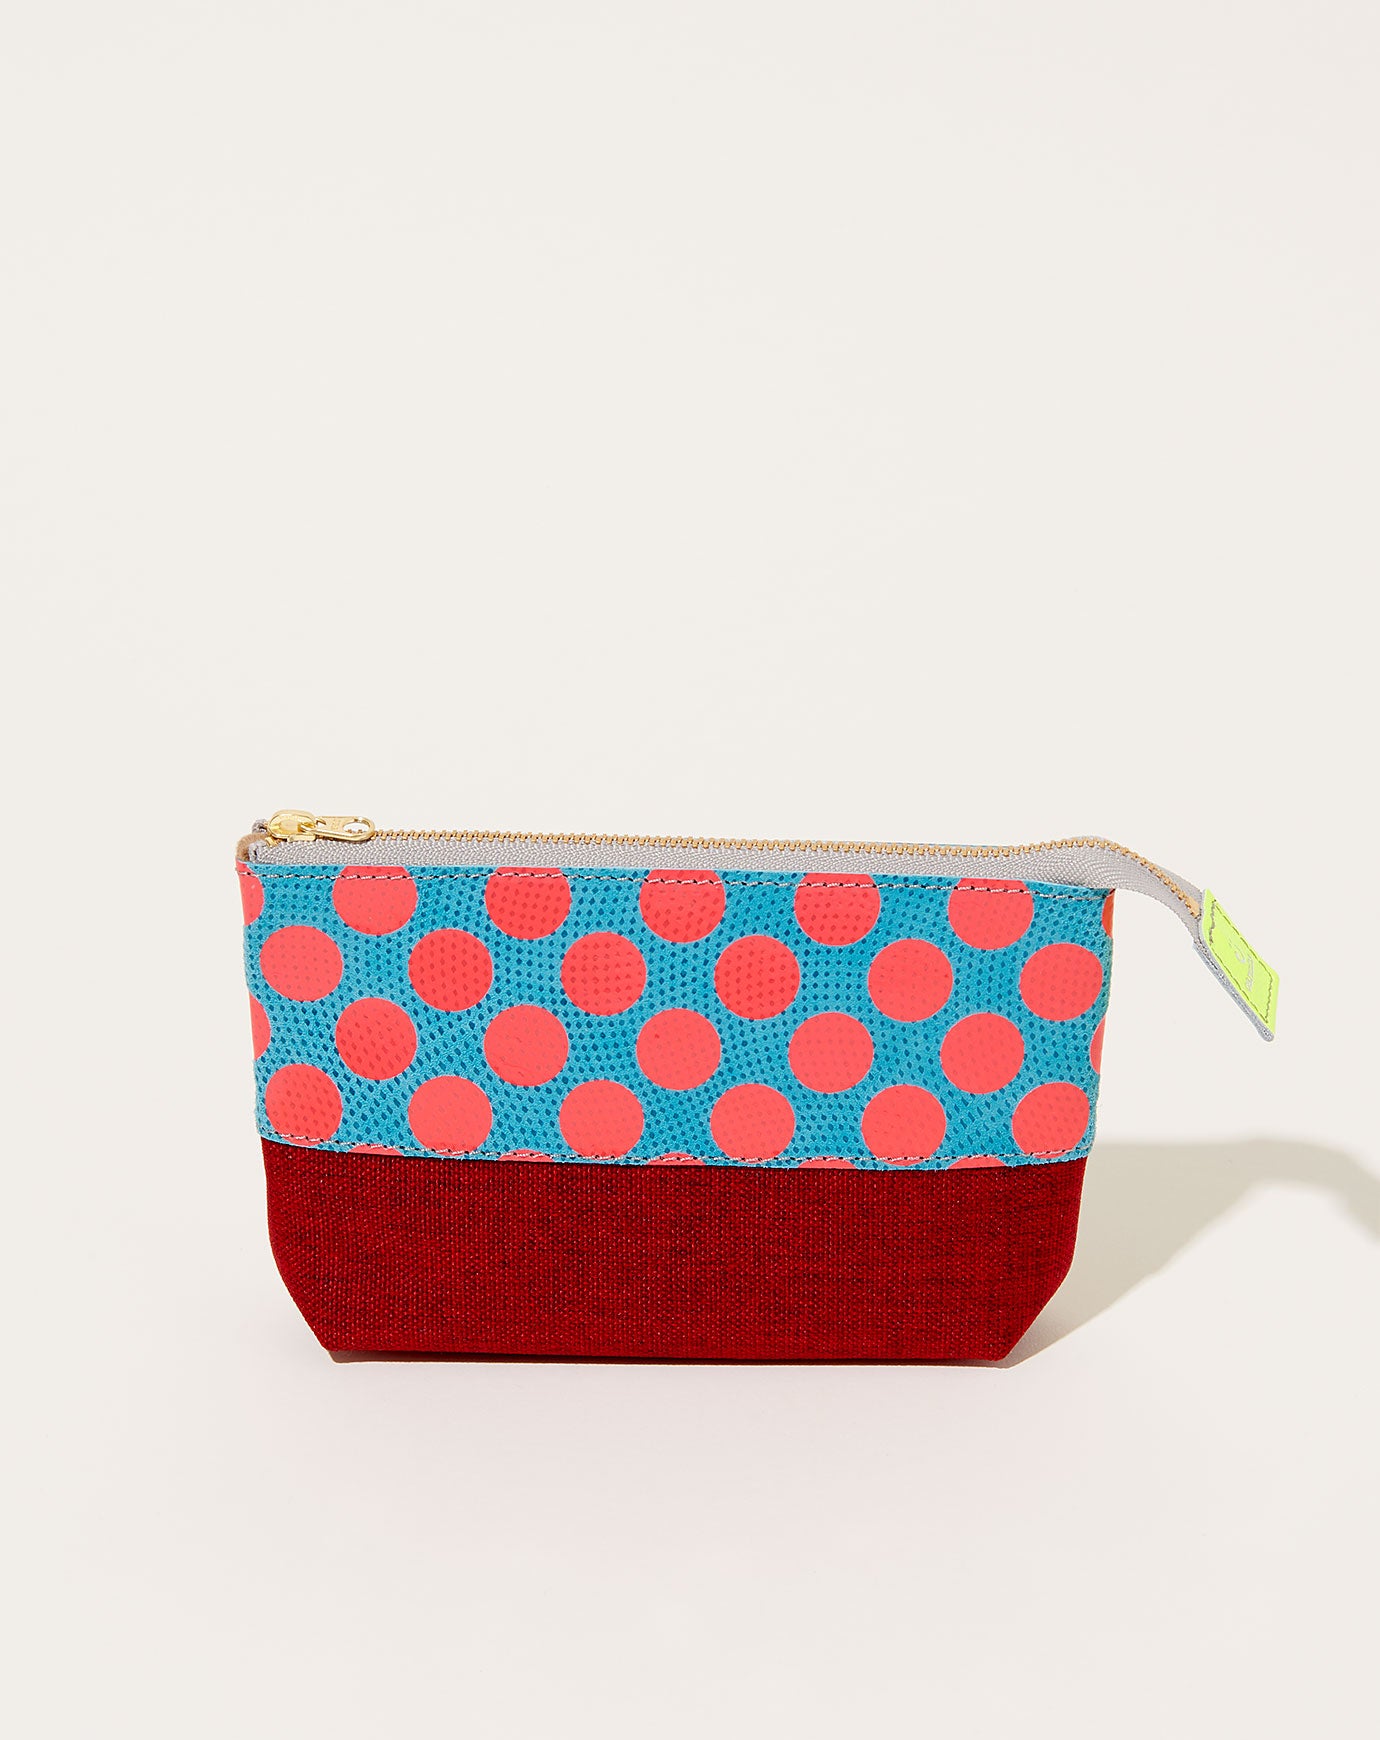 Carmine Ecology Leather Pouch in Neon Red